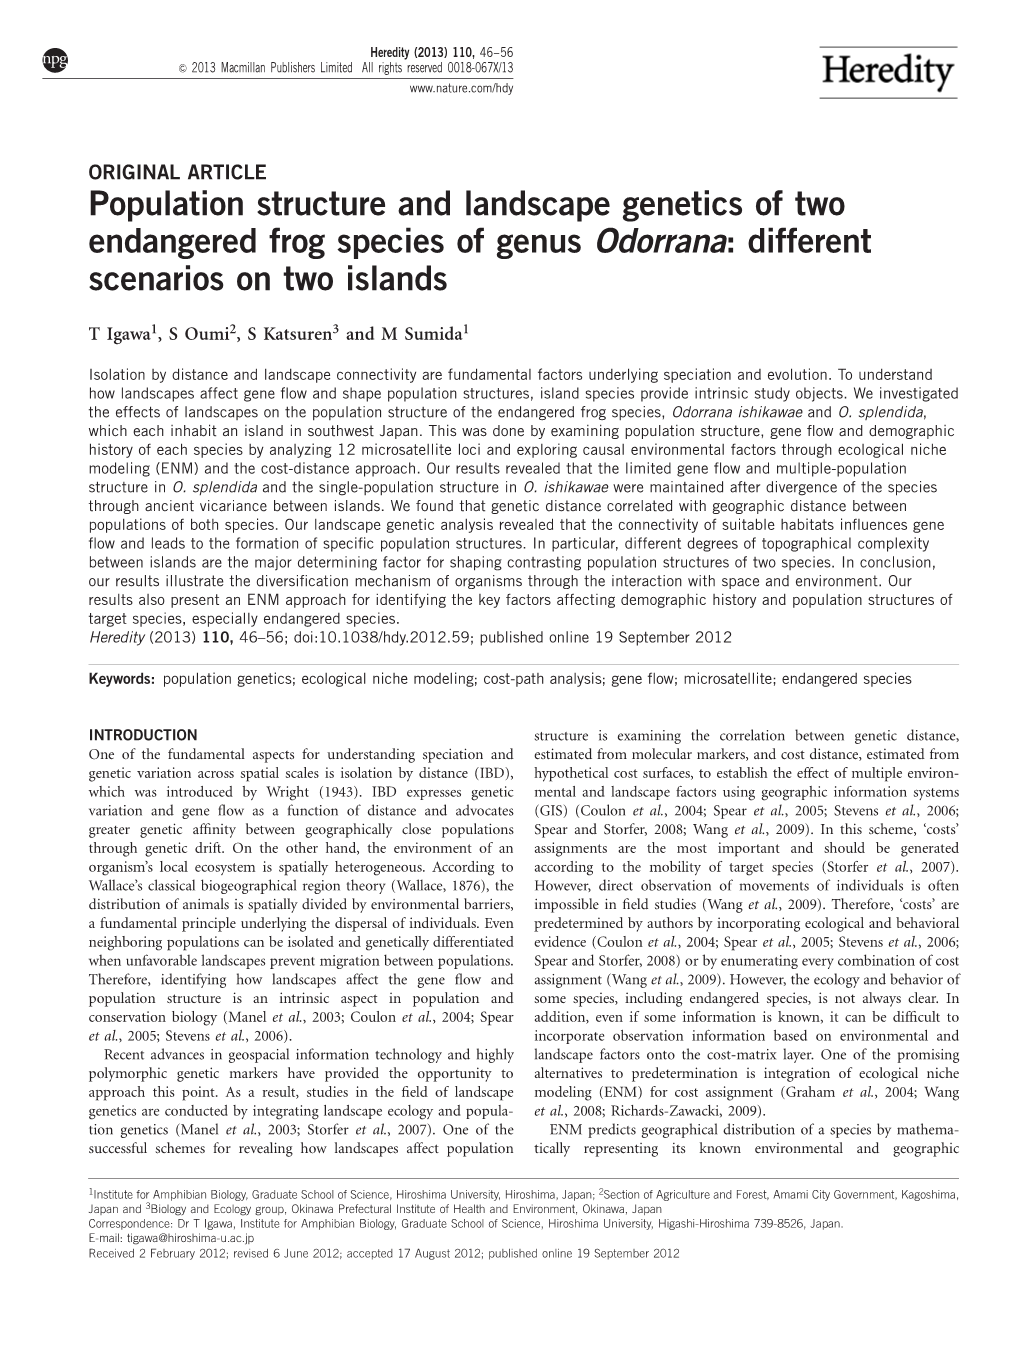 Population Structure and Landscape Genetics of Two Endangered Frog Species of Genus Odorrana: Different Scenarios on Two Islands